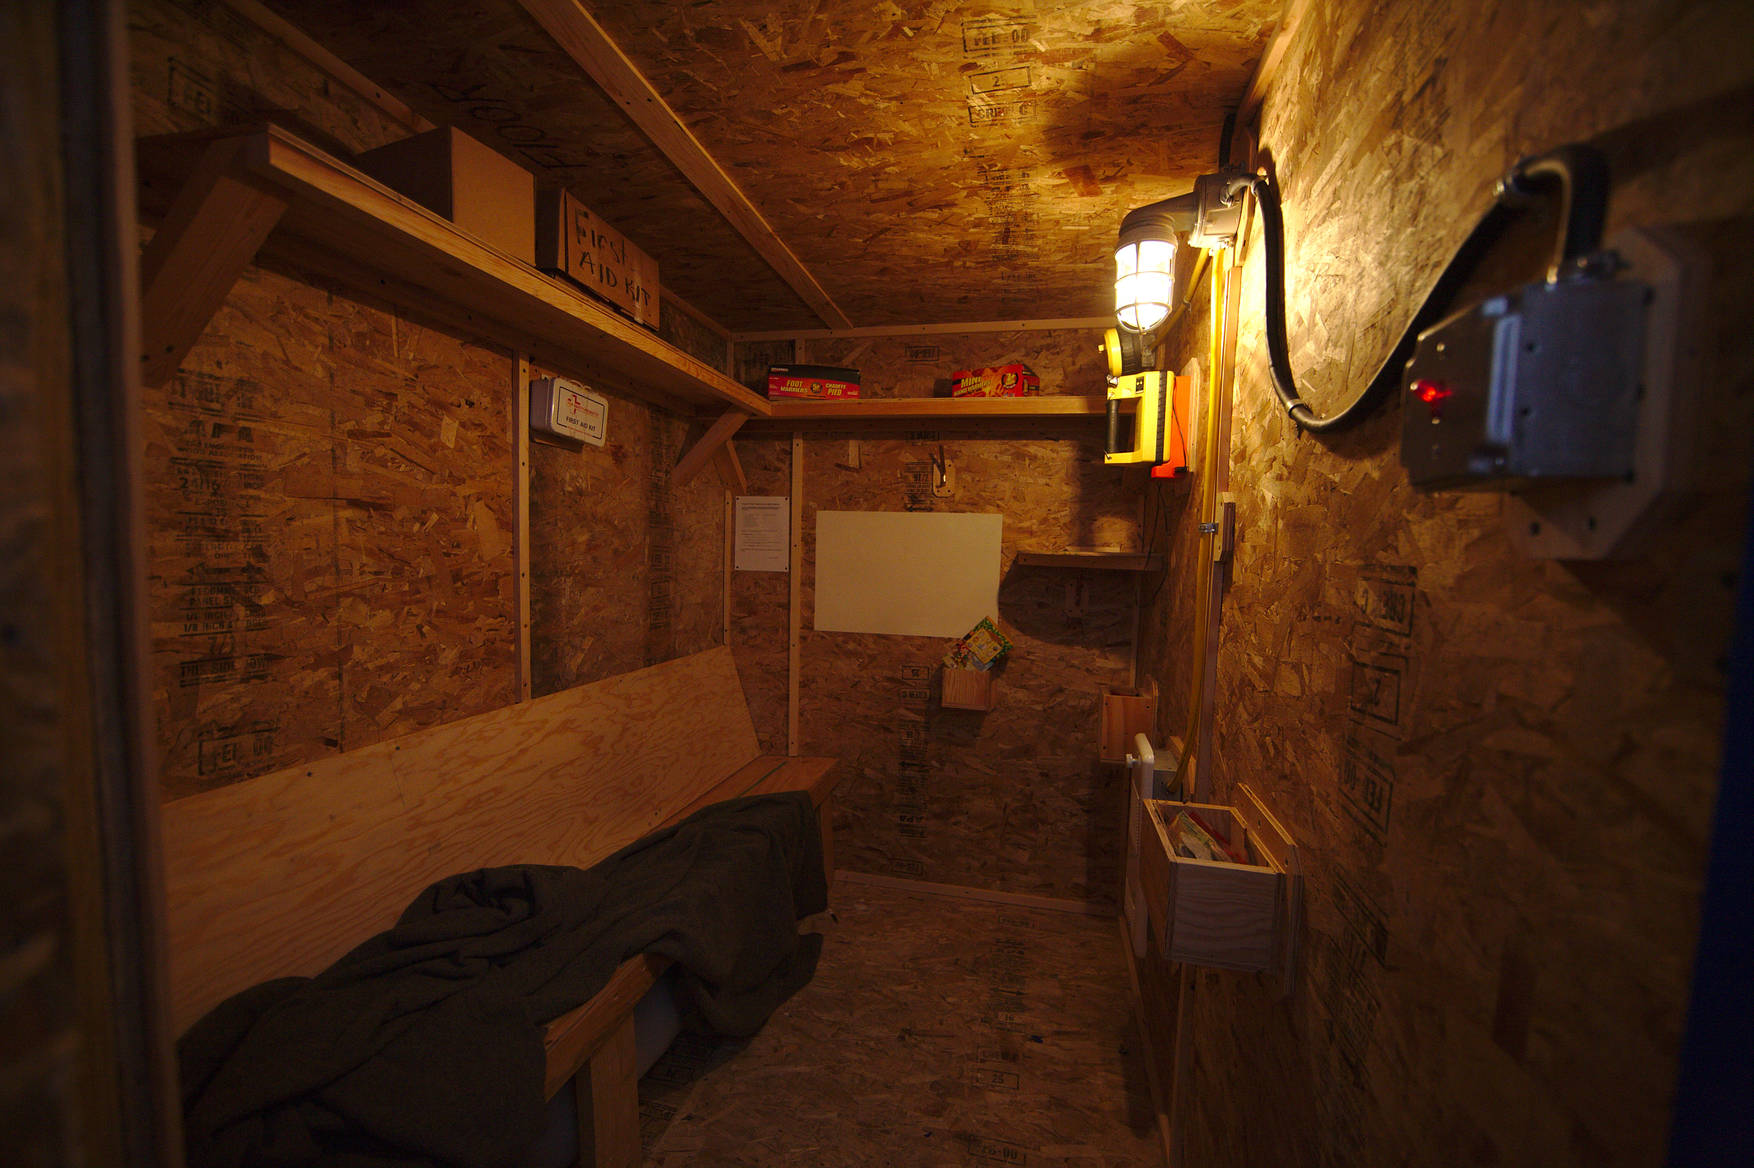 The main tunnel segment contains a warming shack after about two thirds of its length